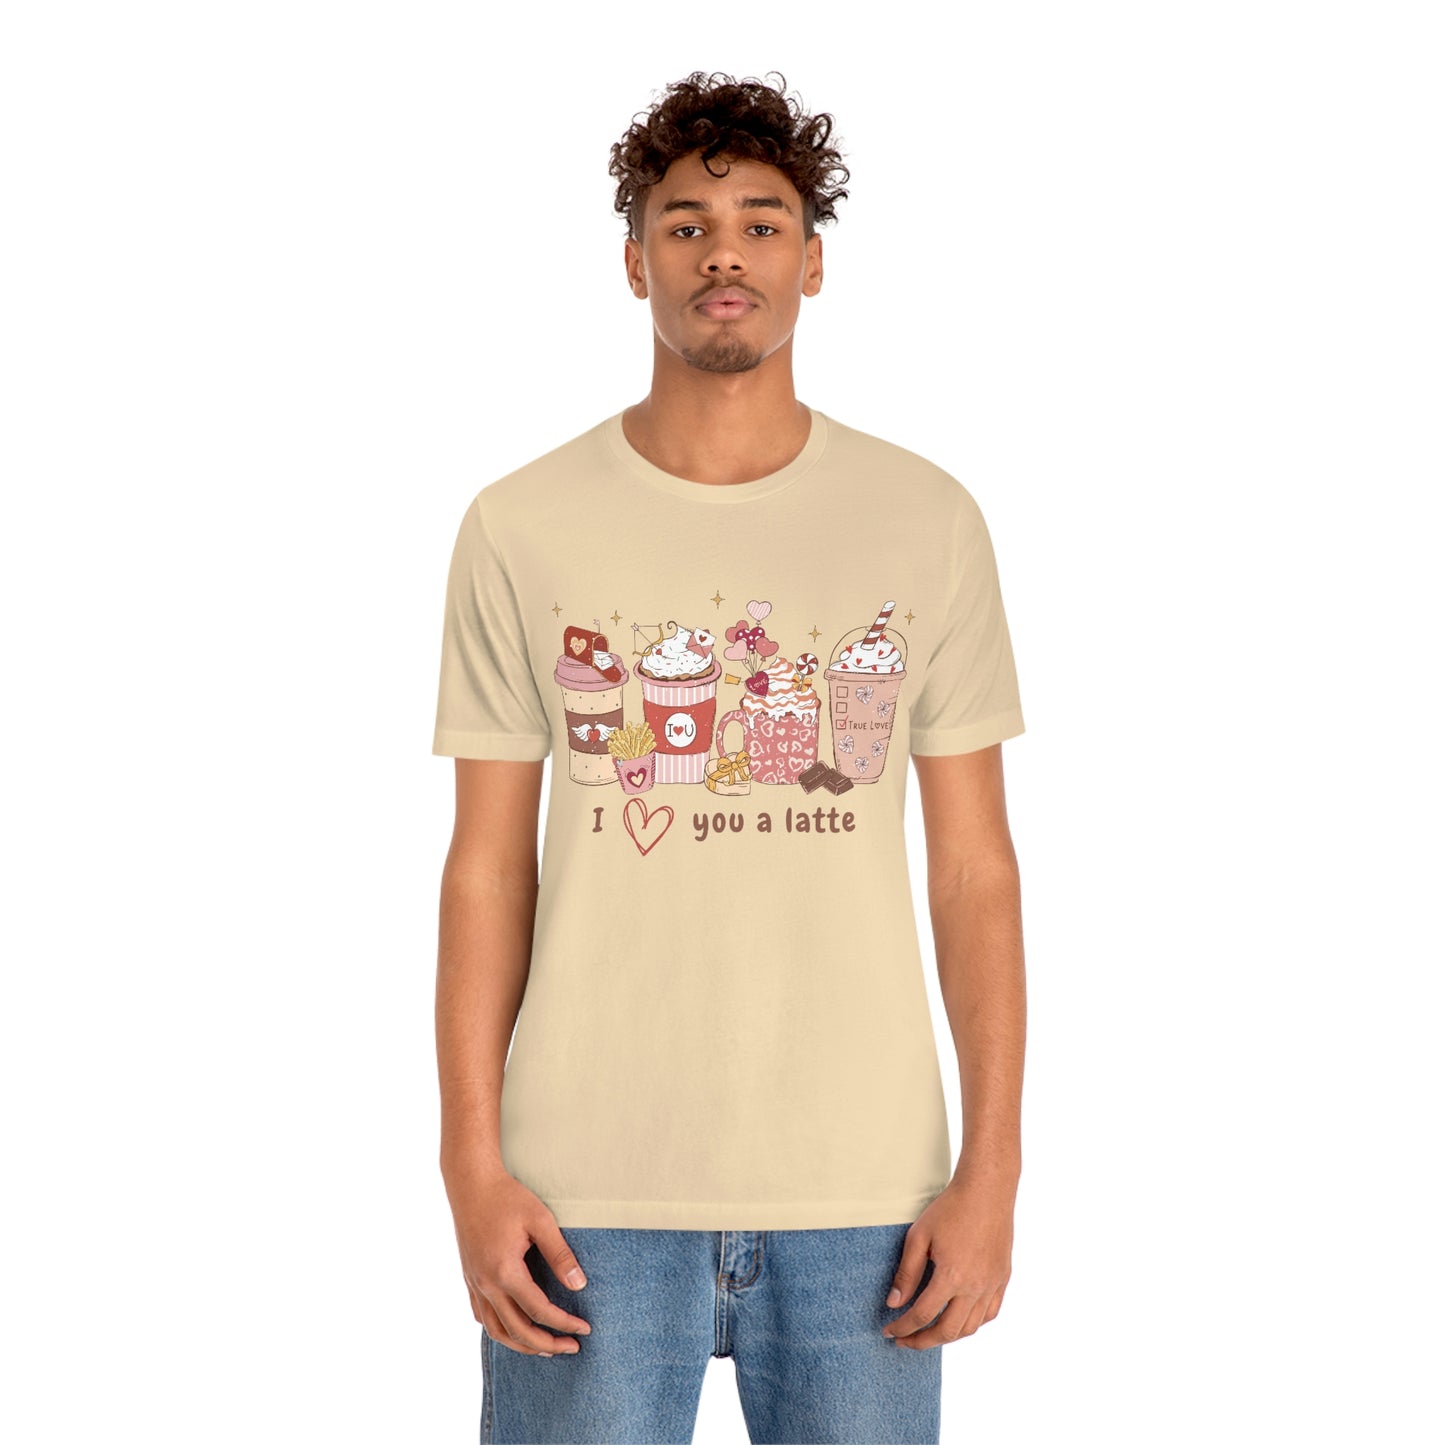 I (heart) Love You a Latte Be Mine Valentine Jersey Short Sleeve Tee Small-3XL